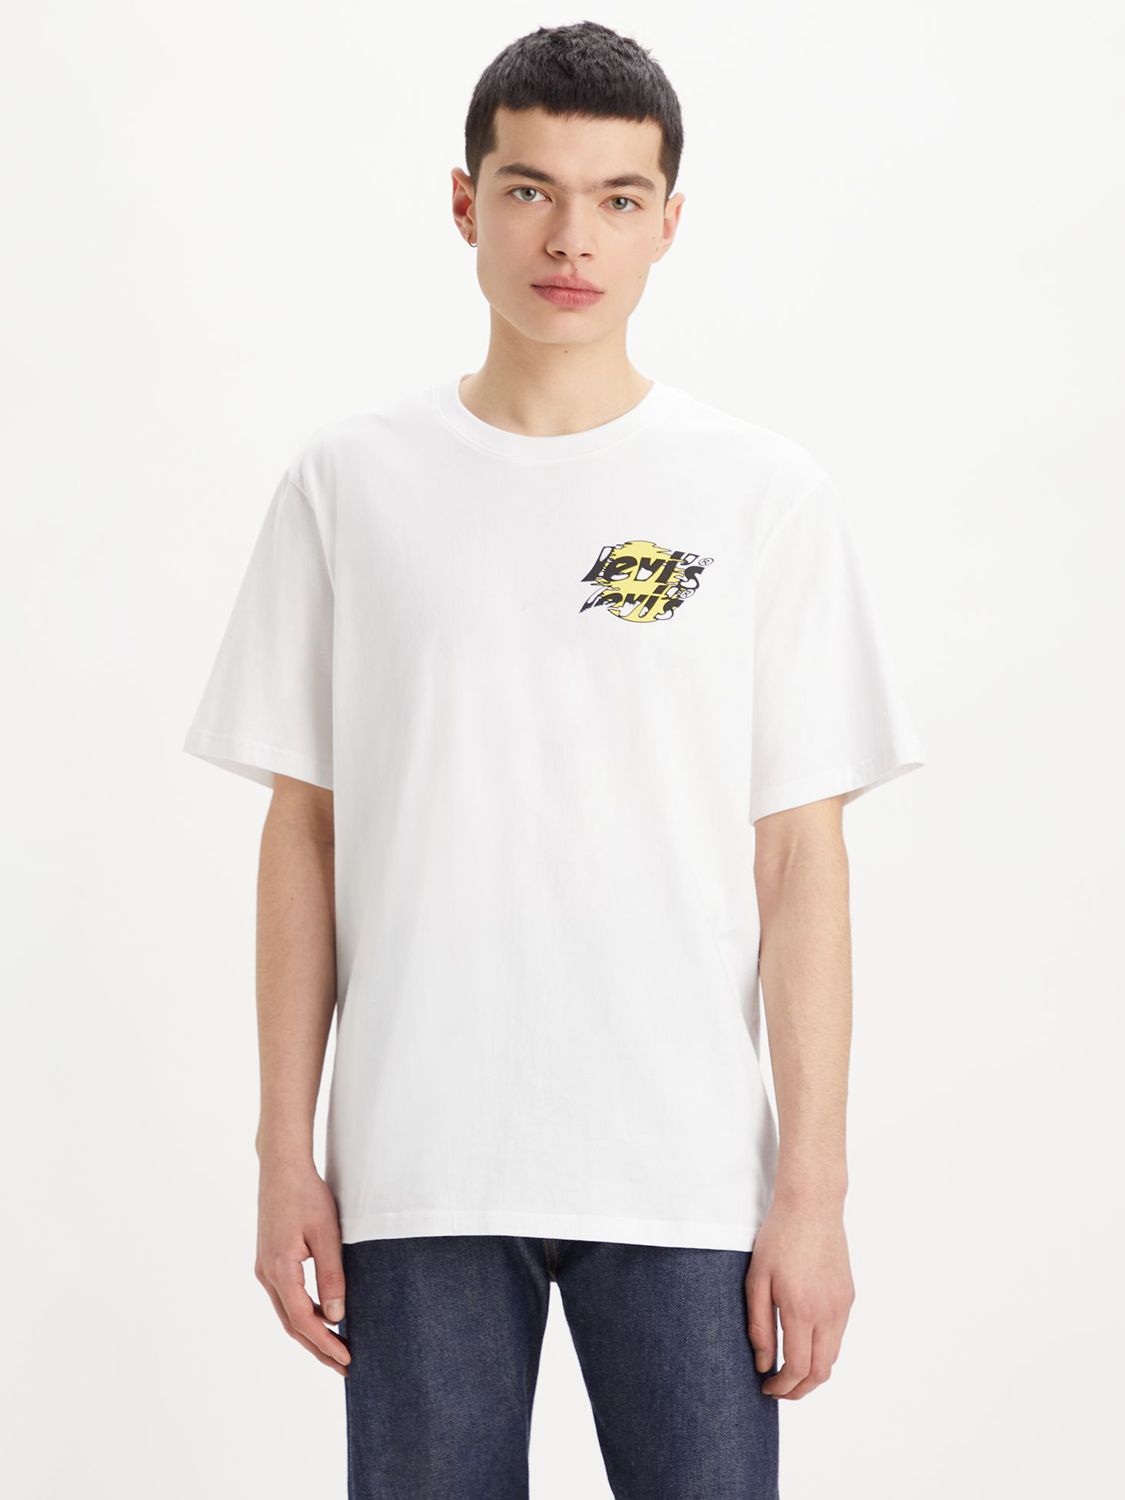 Levi's Graphic Logo Short Sleeve Relaxed Fit T-Shirt, White